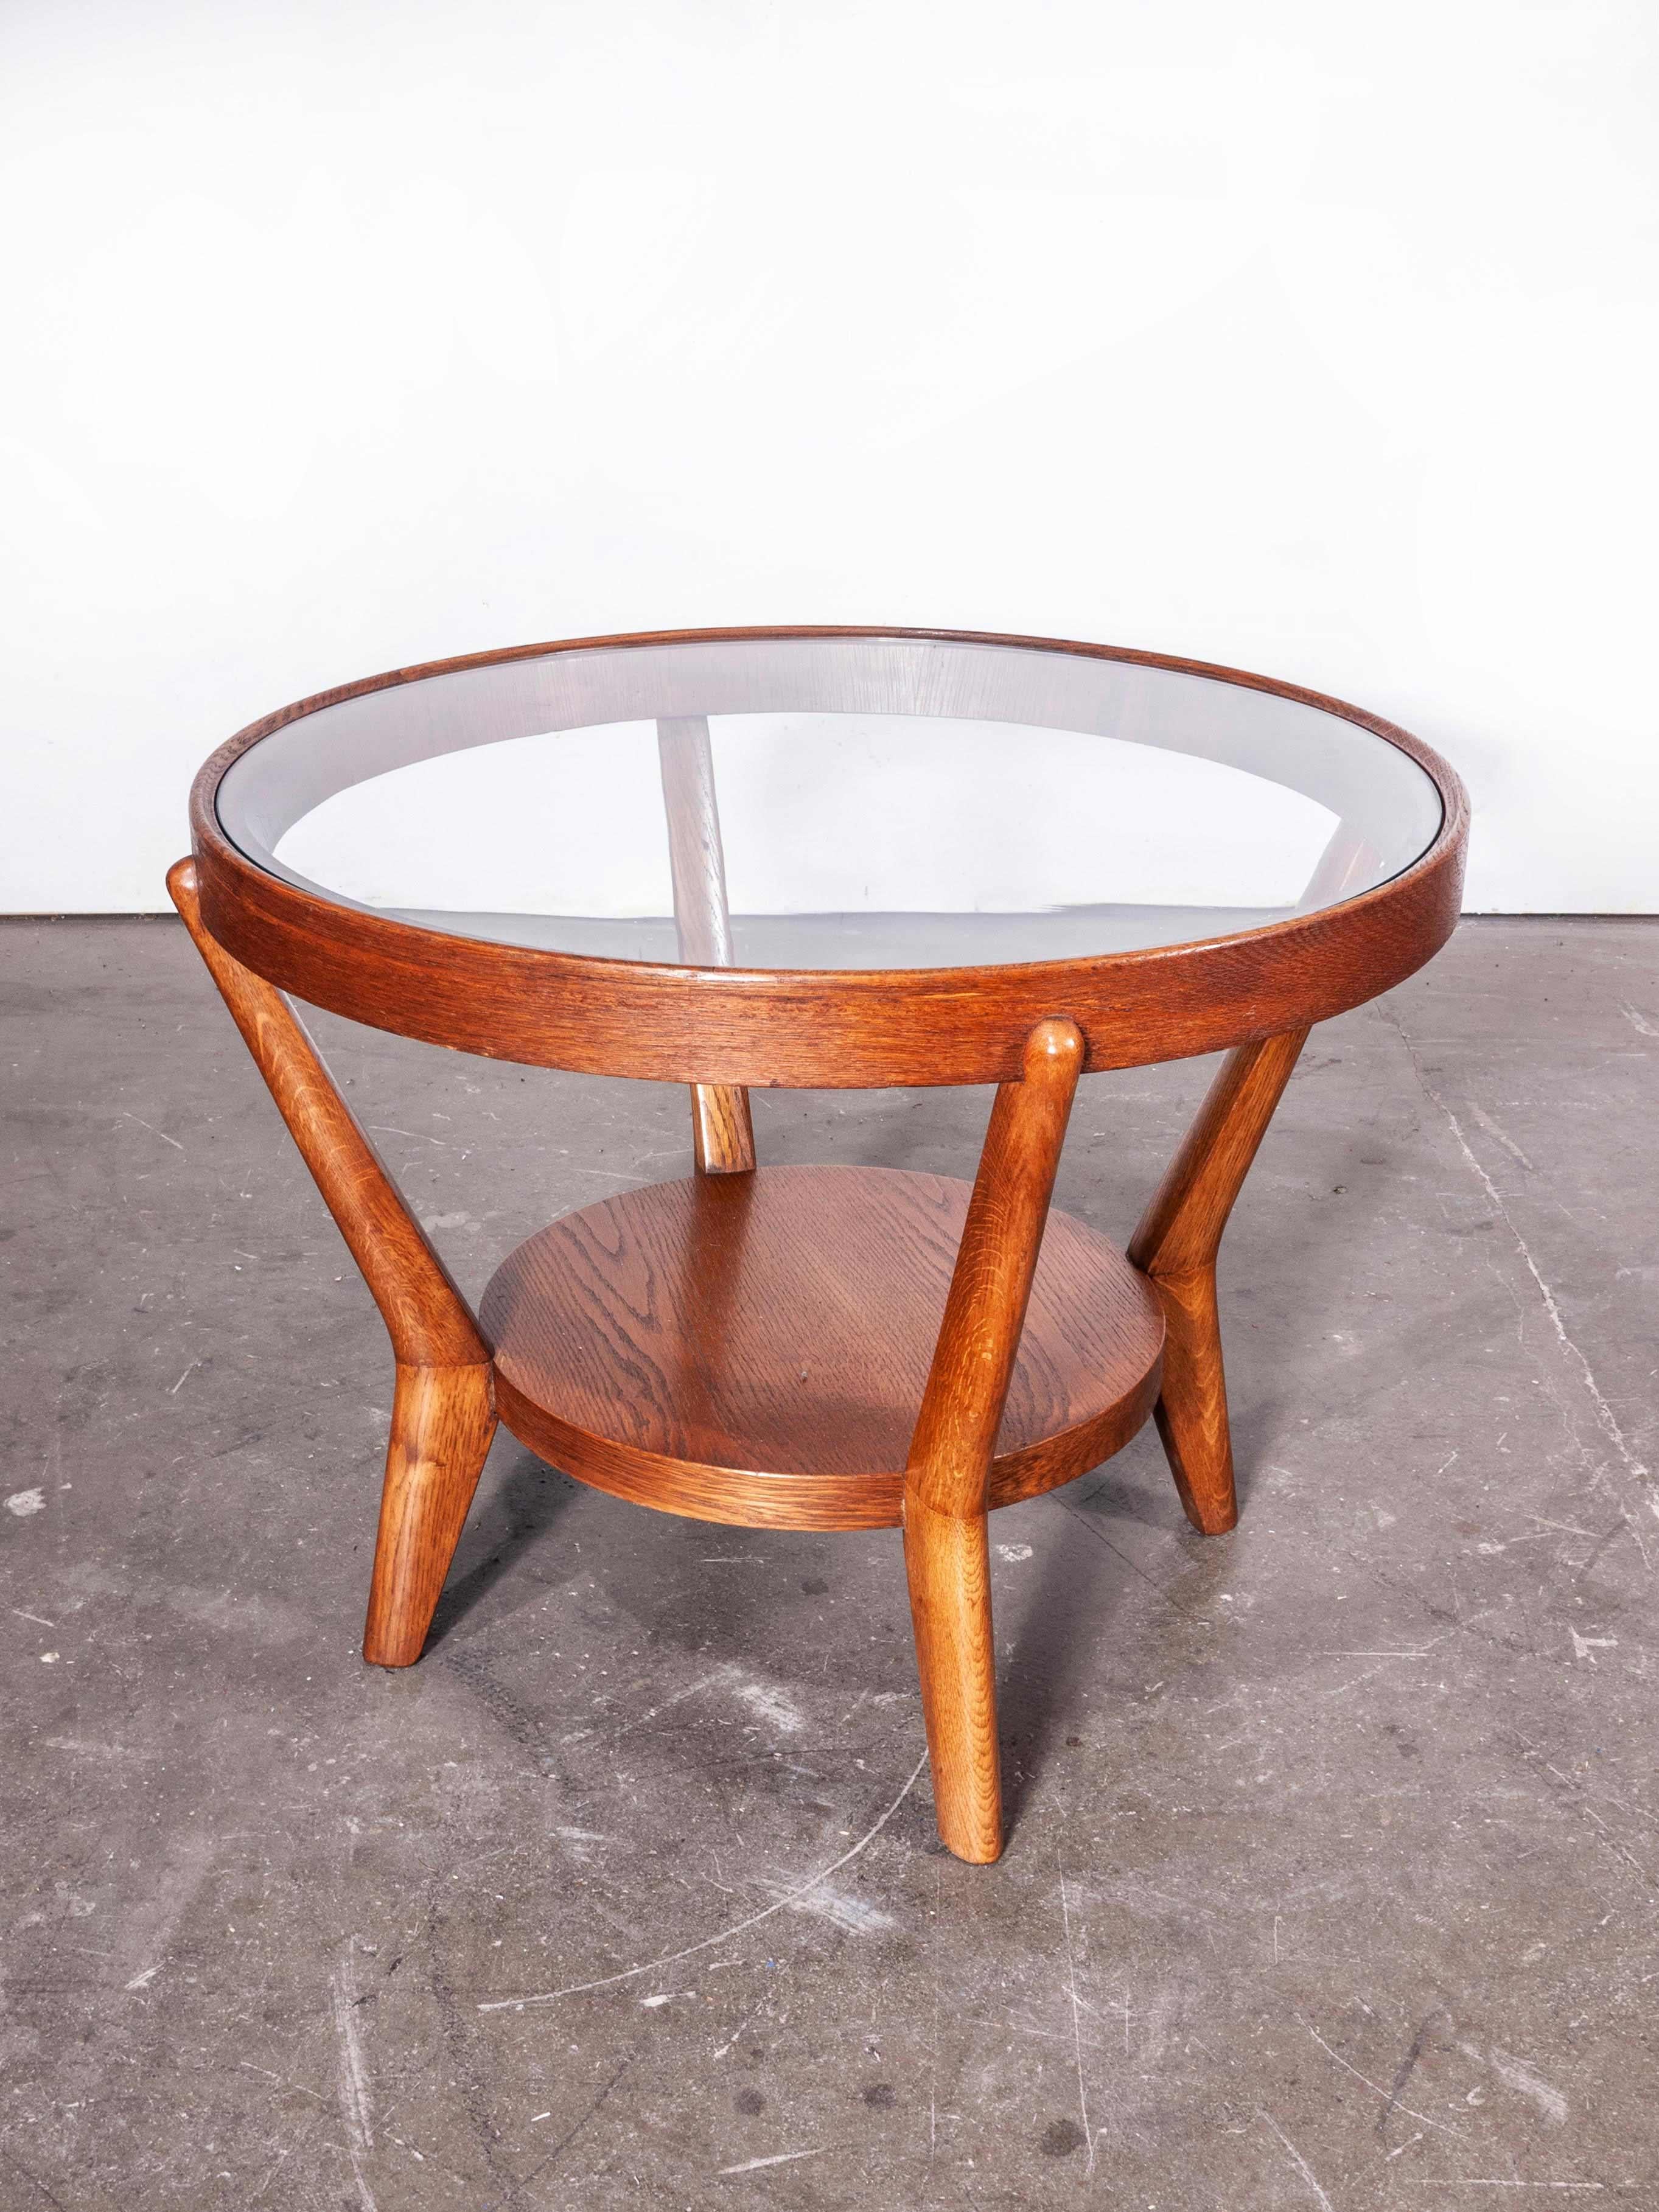 1950s round occasional table by Kozelka and Kropacek for Interieur Praha, warm oak
1950s round occasional table by Kozelka and Kropacek for Interieur Praha. A beautifully proportioned table made from European oak retaining its original glass top.